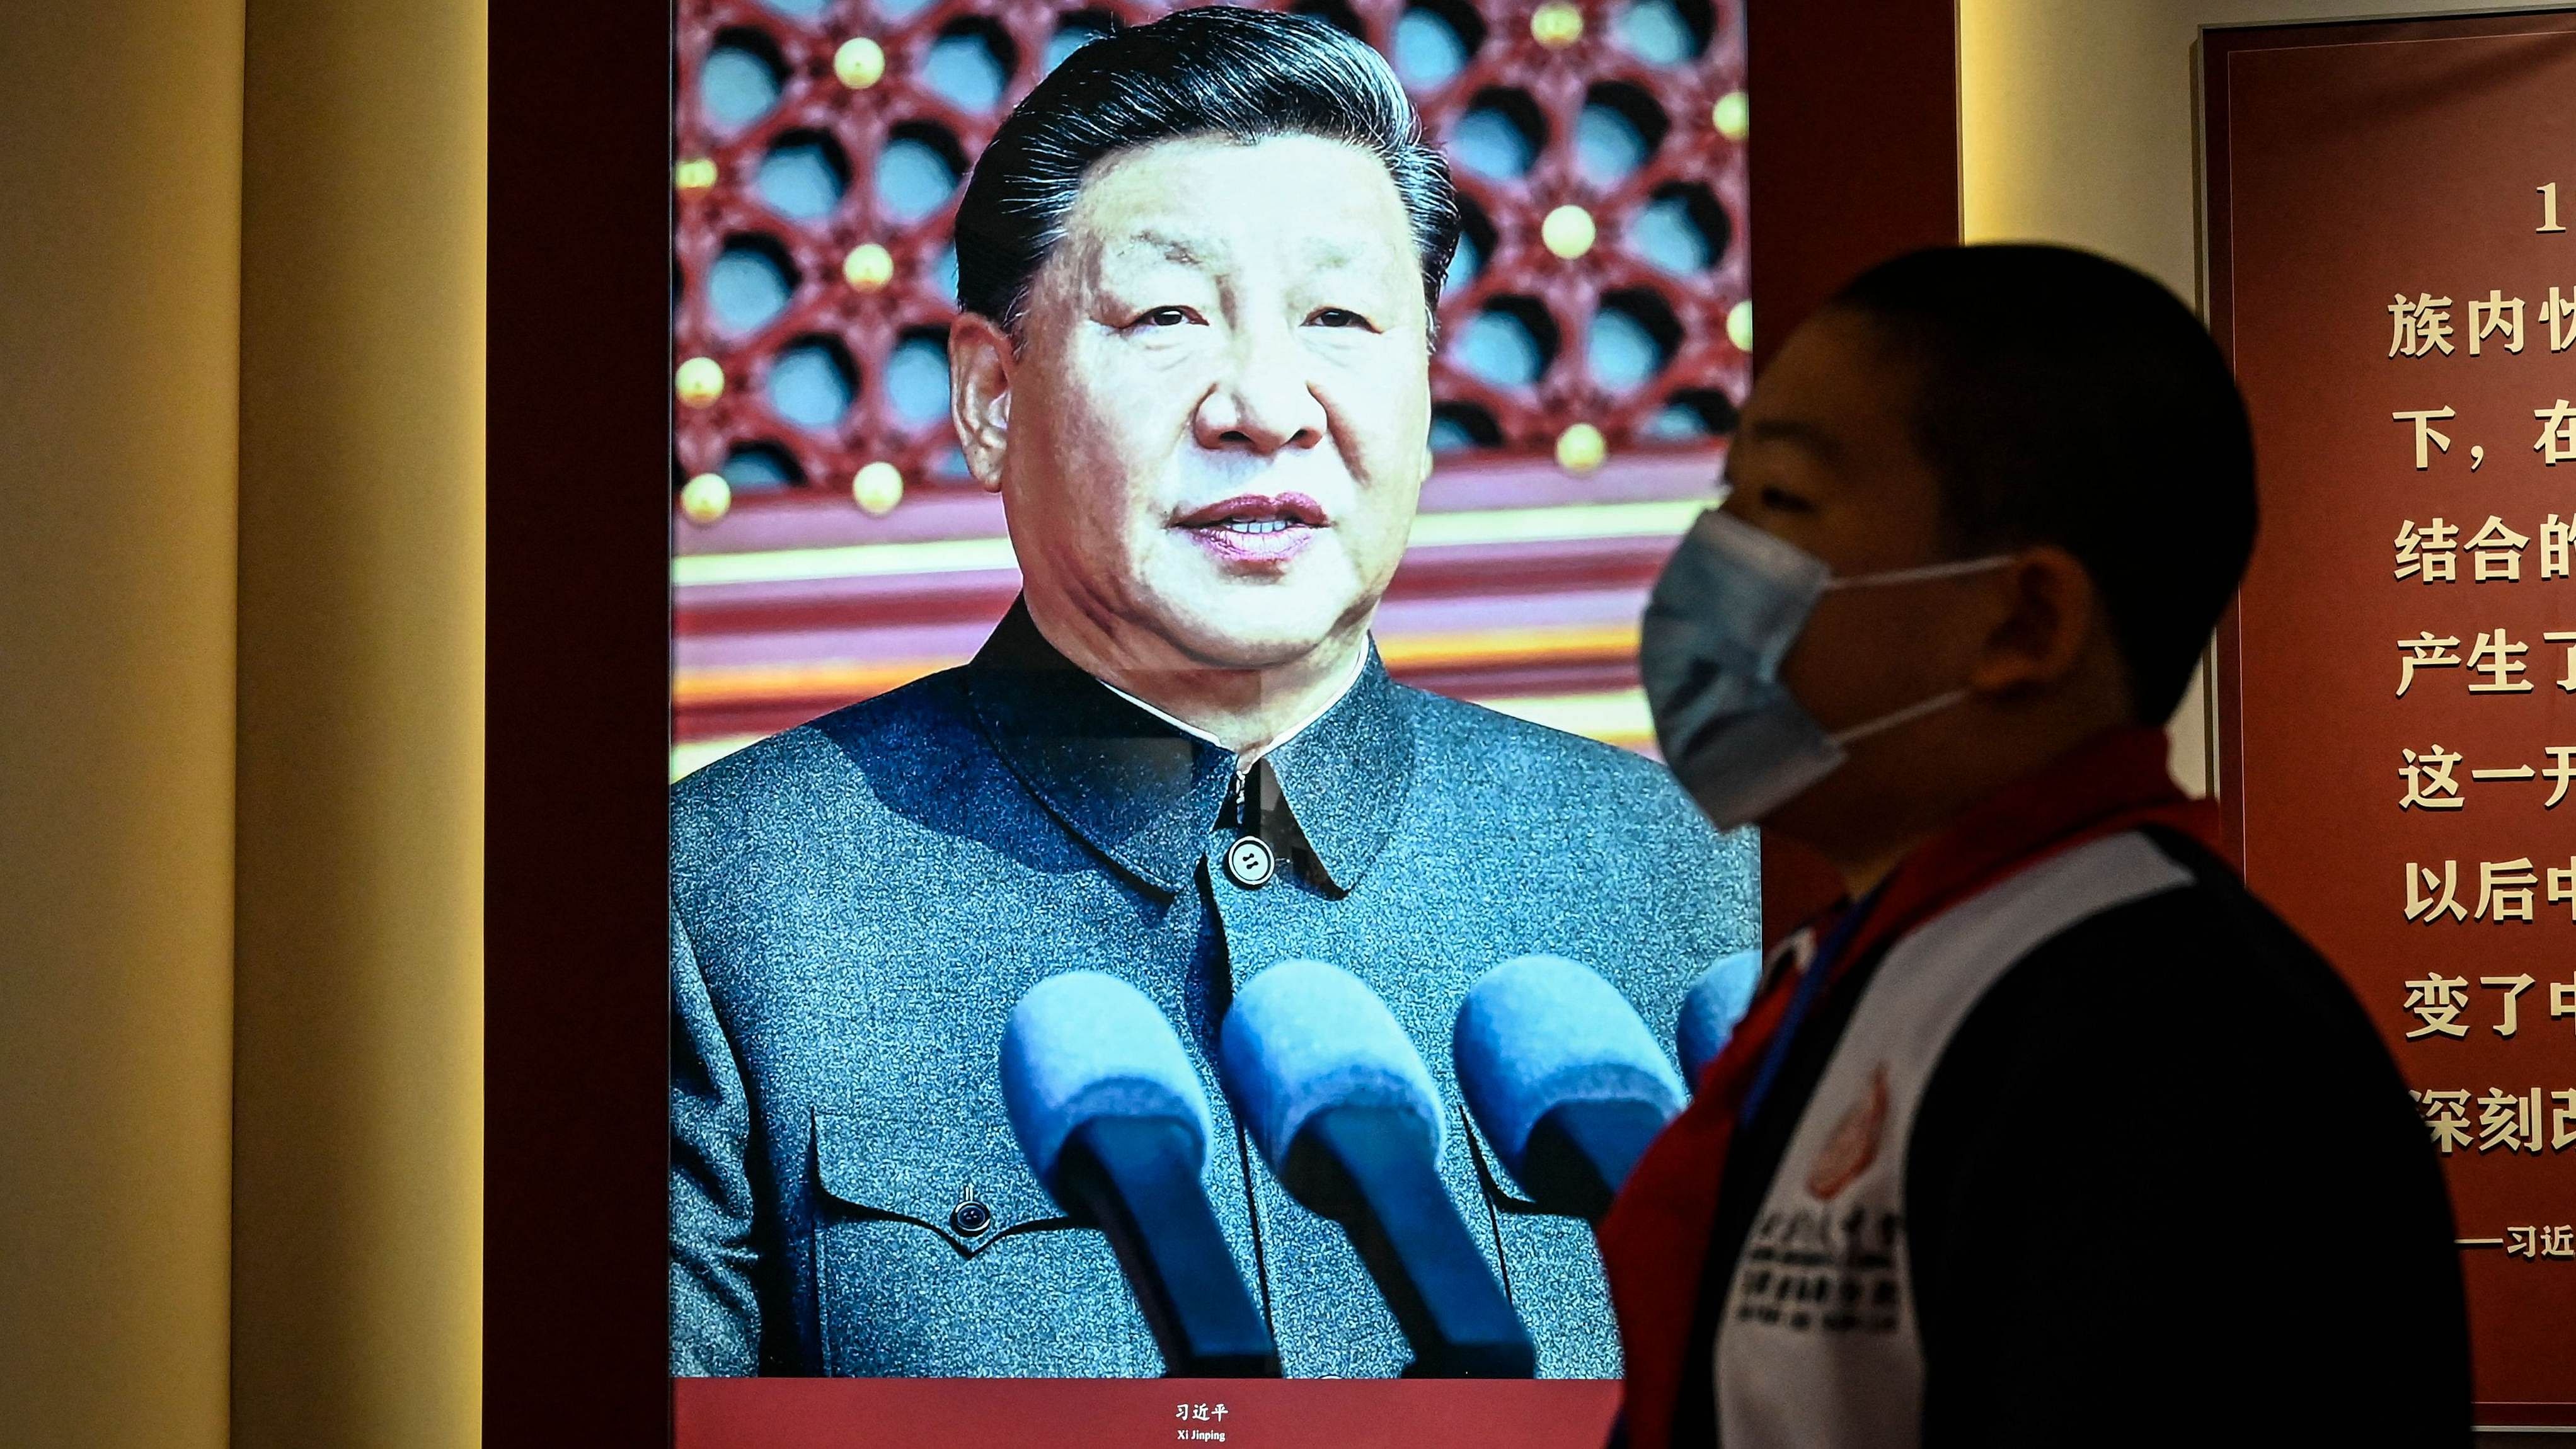 Xi is widely expected to secure a third term as party leader at the meeting, upending the succession norms in place since the 1990s. Credit: AFP Photo